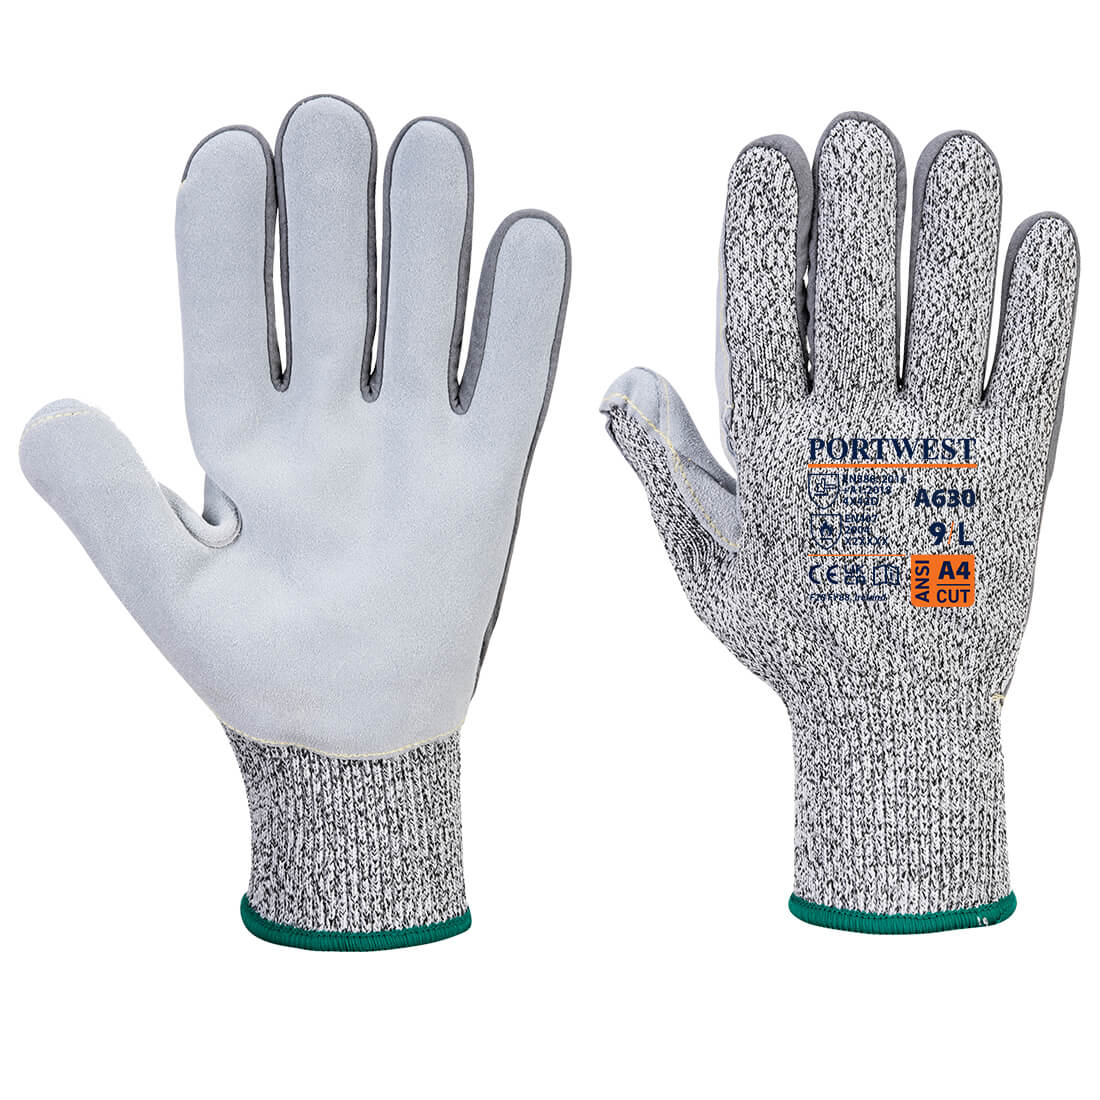 A662 Portwest® Razor-Lite Work Gloves with Leather Reinforced Palms